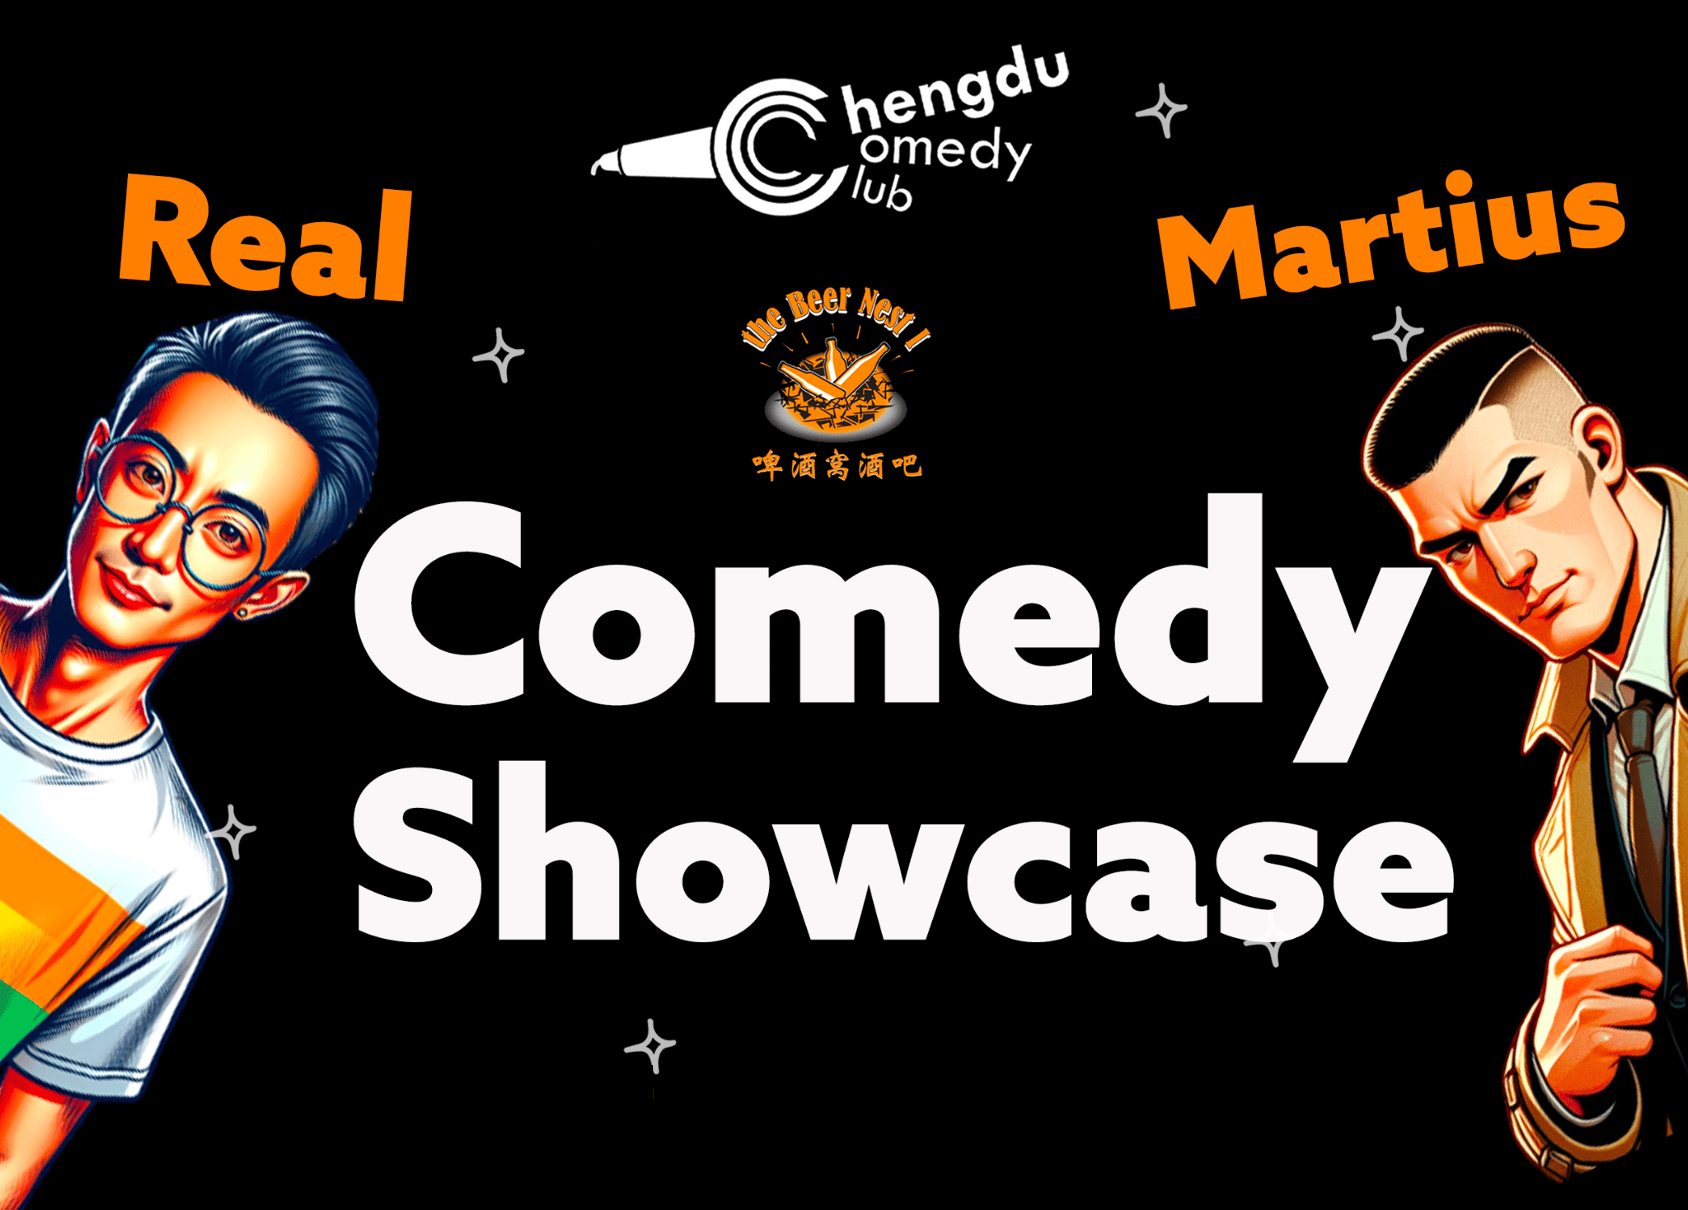 Chengdu Real and Martius Headliner Comedy Show featured chengdu expat